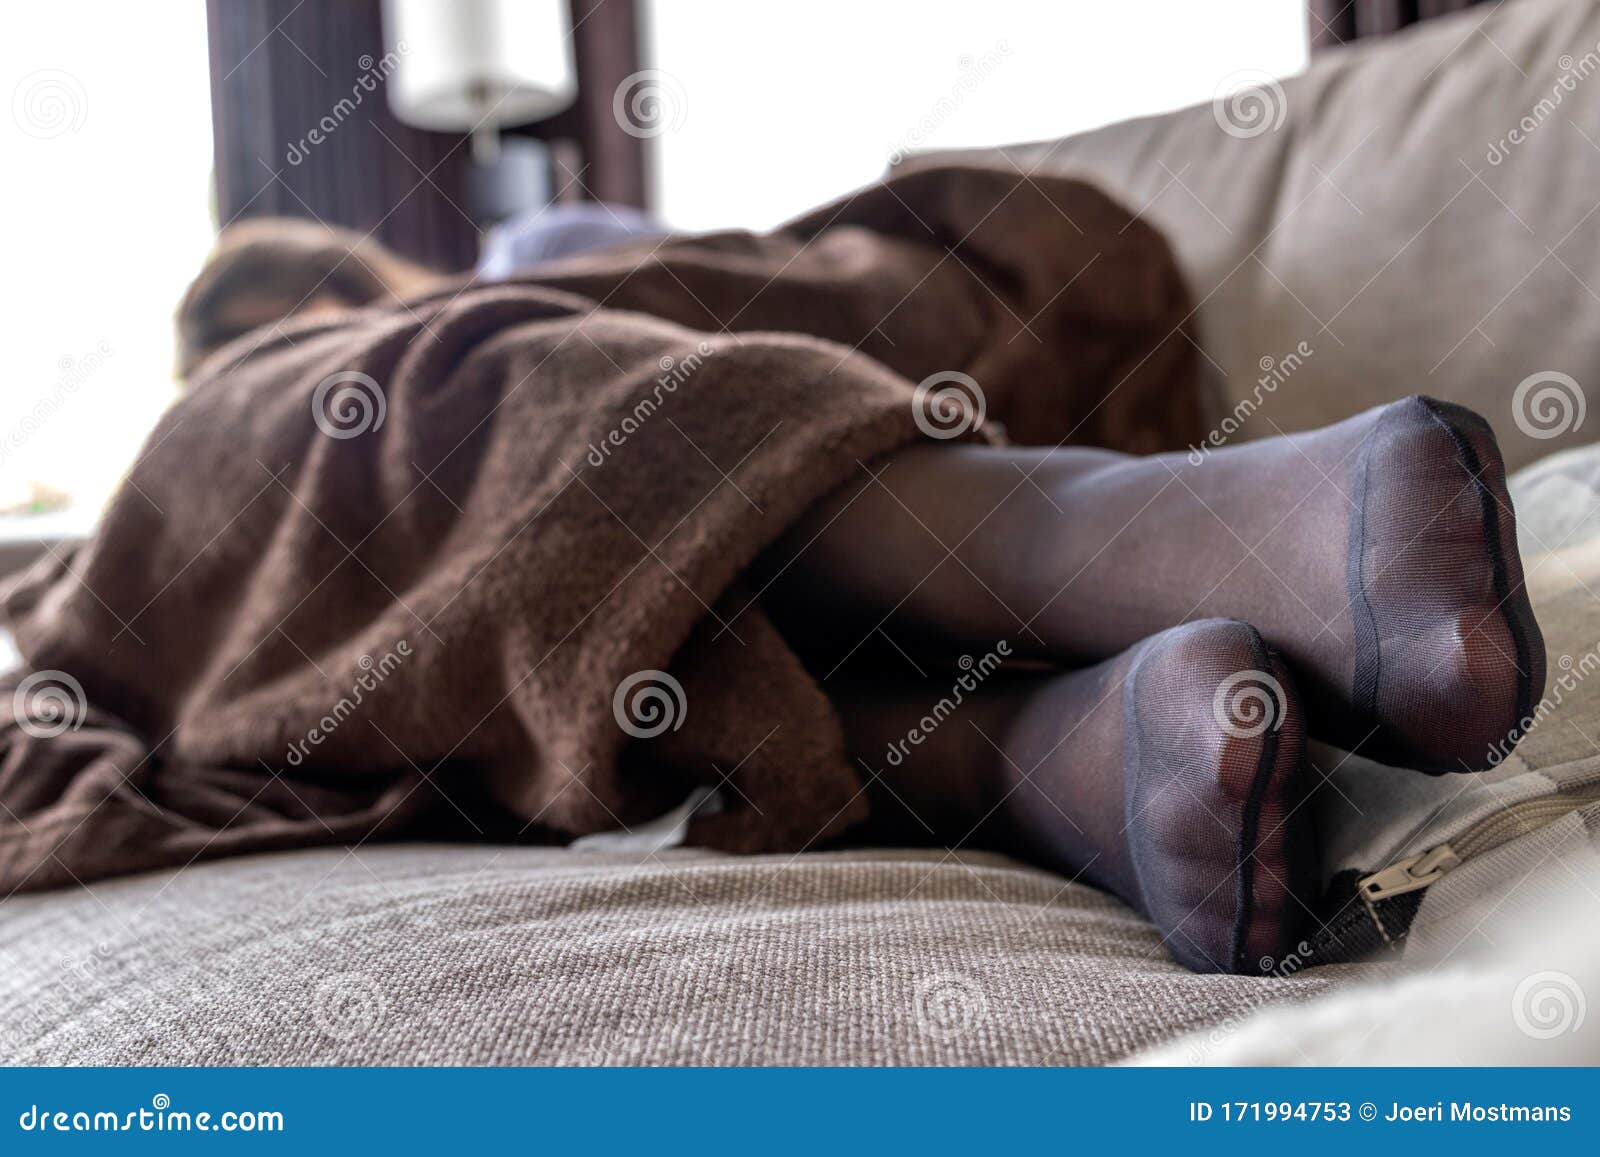 A Potrait of a Girls Black Pantyhose Feet while she is Sleeping in the  Couch Under a Brown Cosy Blanket Stock Image - Image of close, feet:  171994753